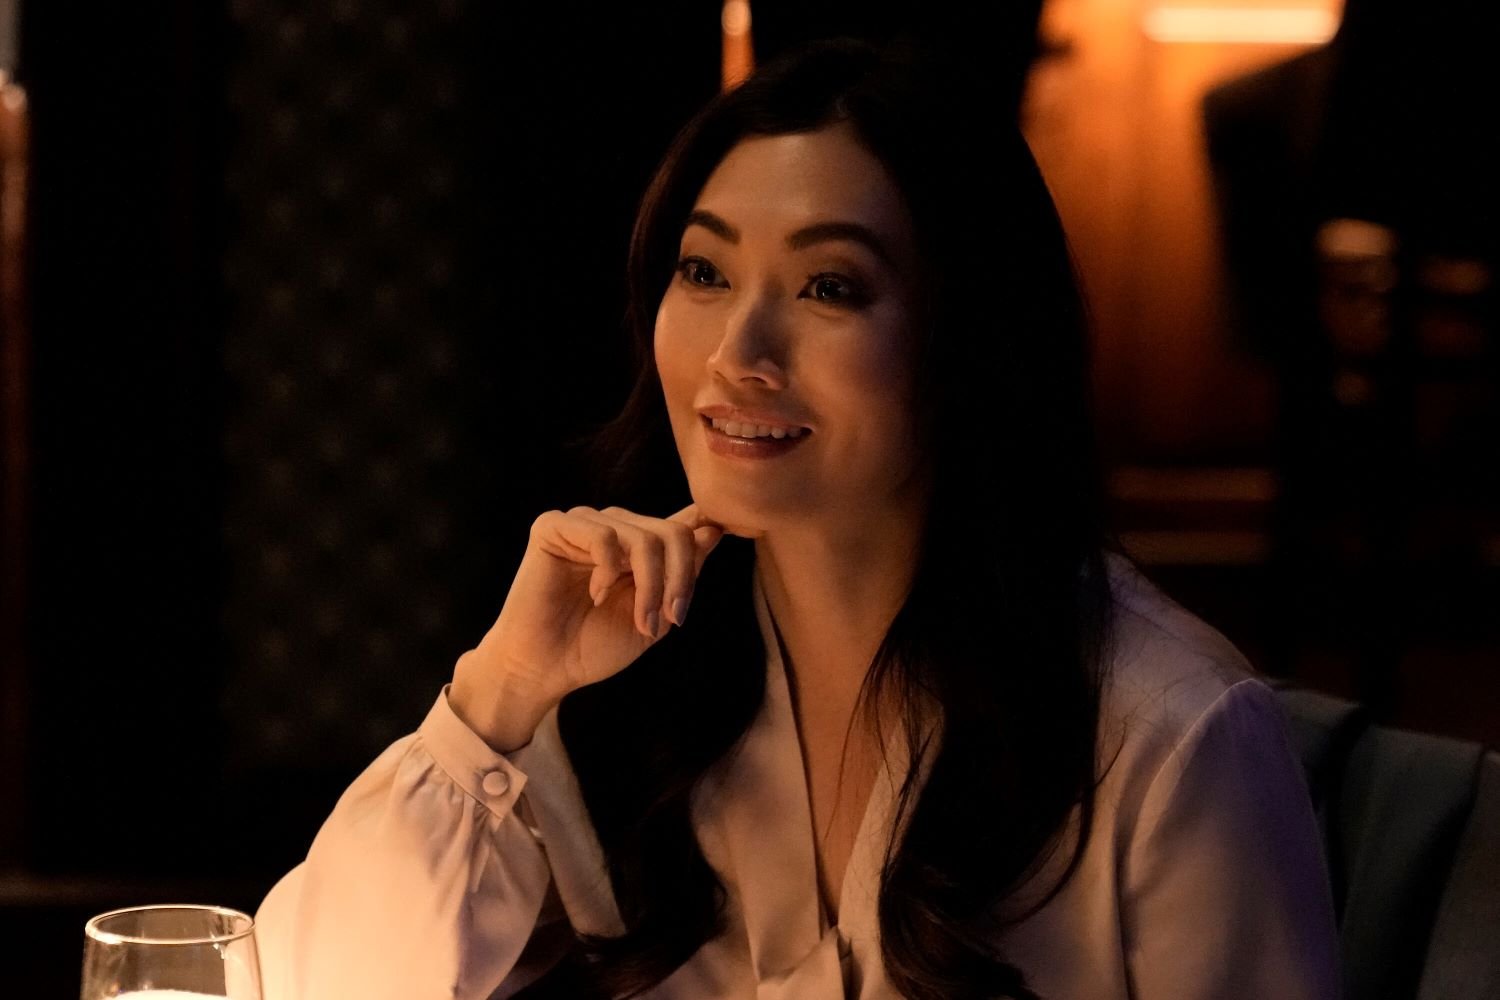 Catherine Haena Kim, in character as Emma Hill in 'The Company You Keep' Episode 2, wears a white long-sleeved blouse.